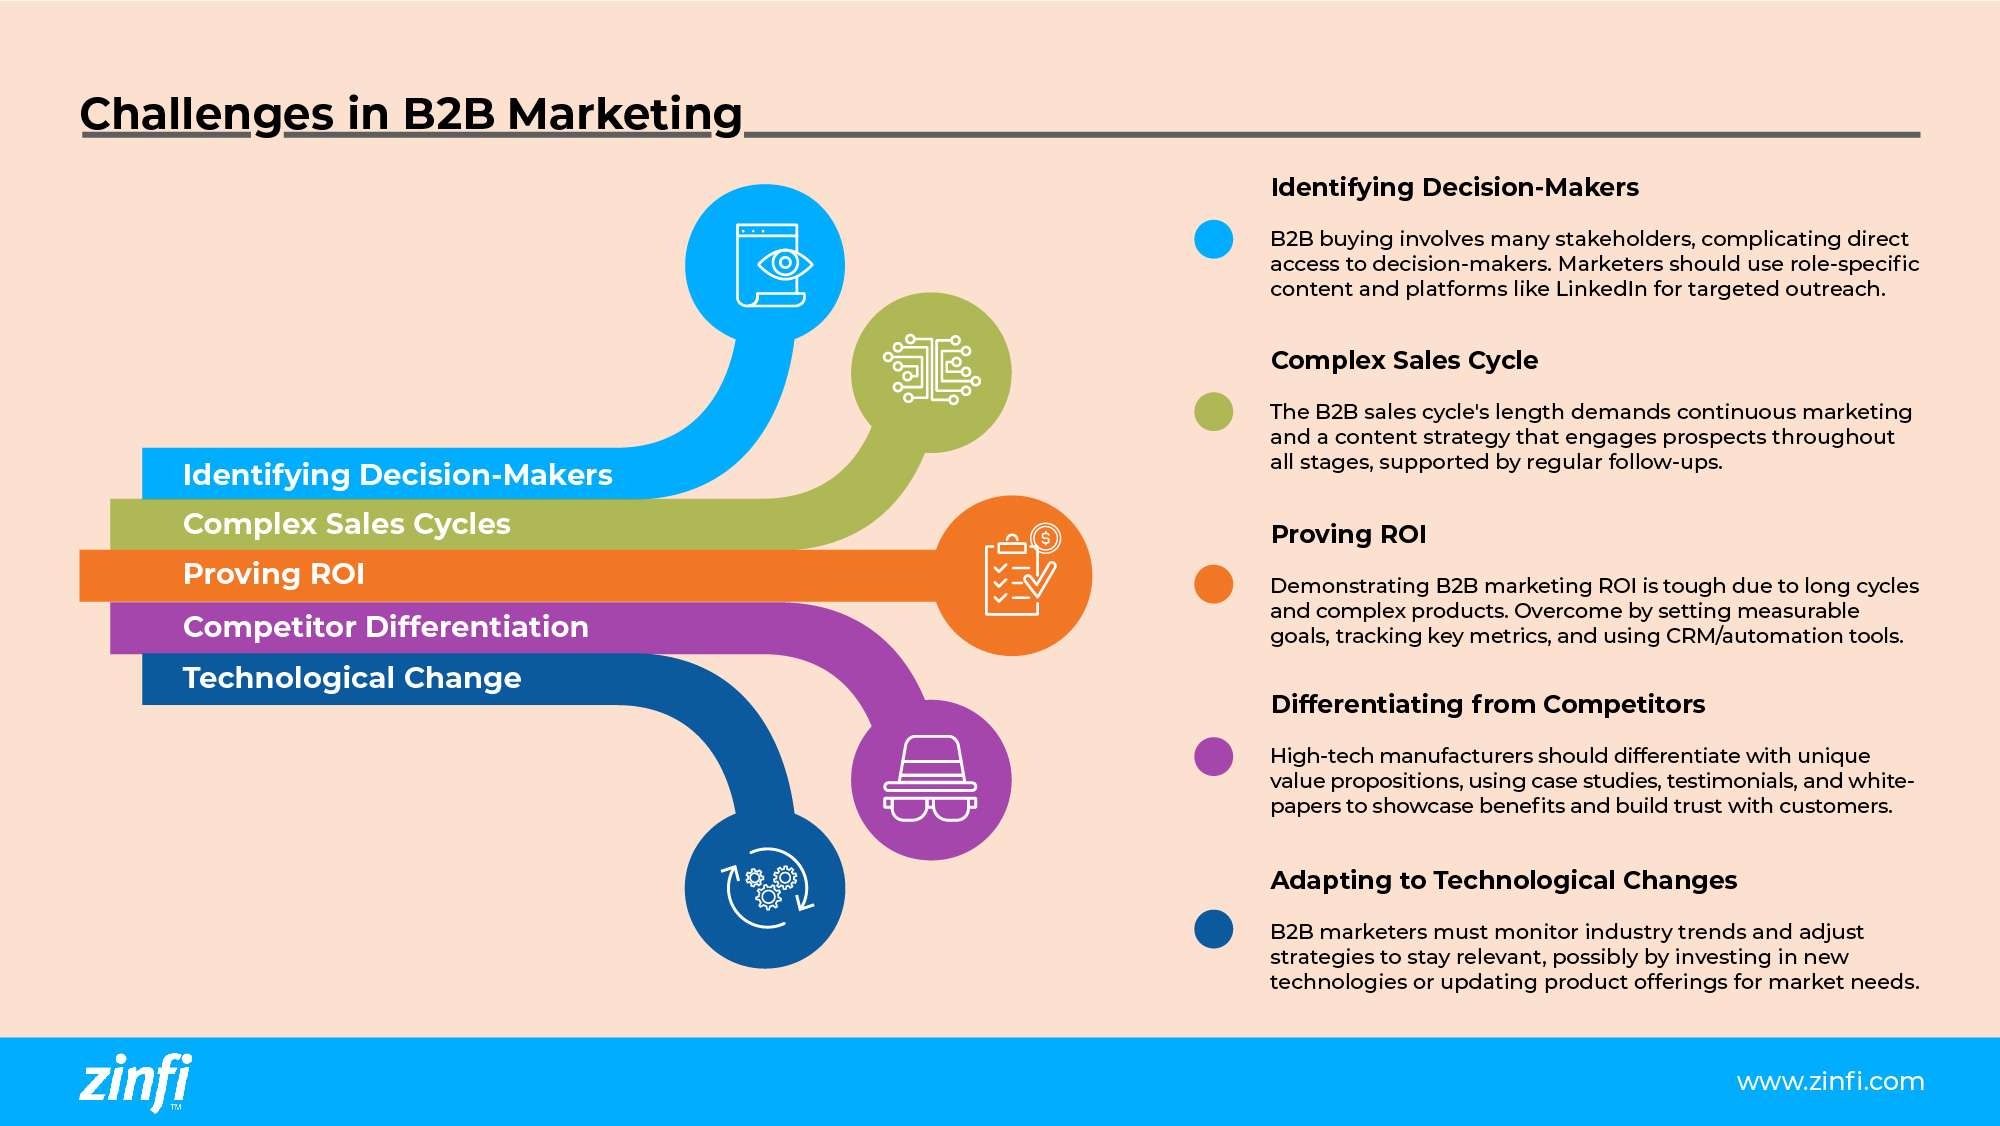 Infographic on the challenges of B2B marketing and how they can be mitigated